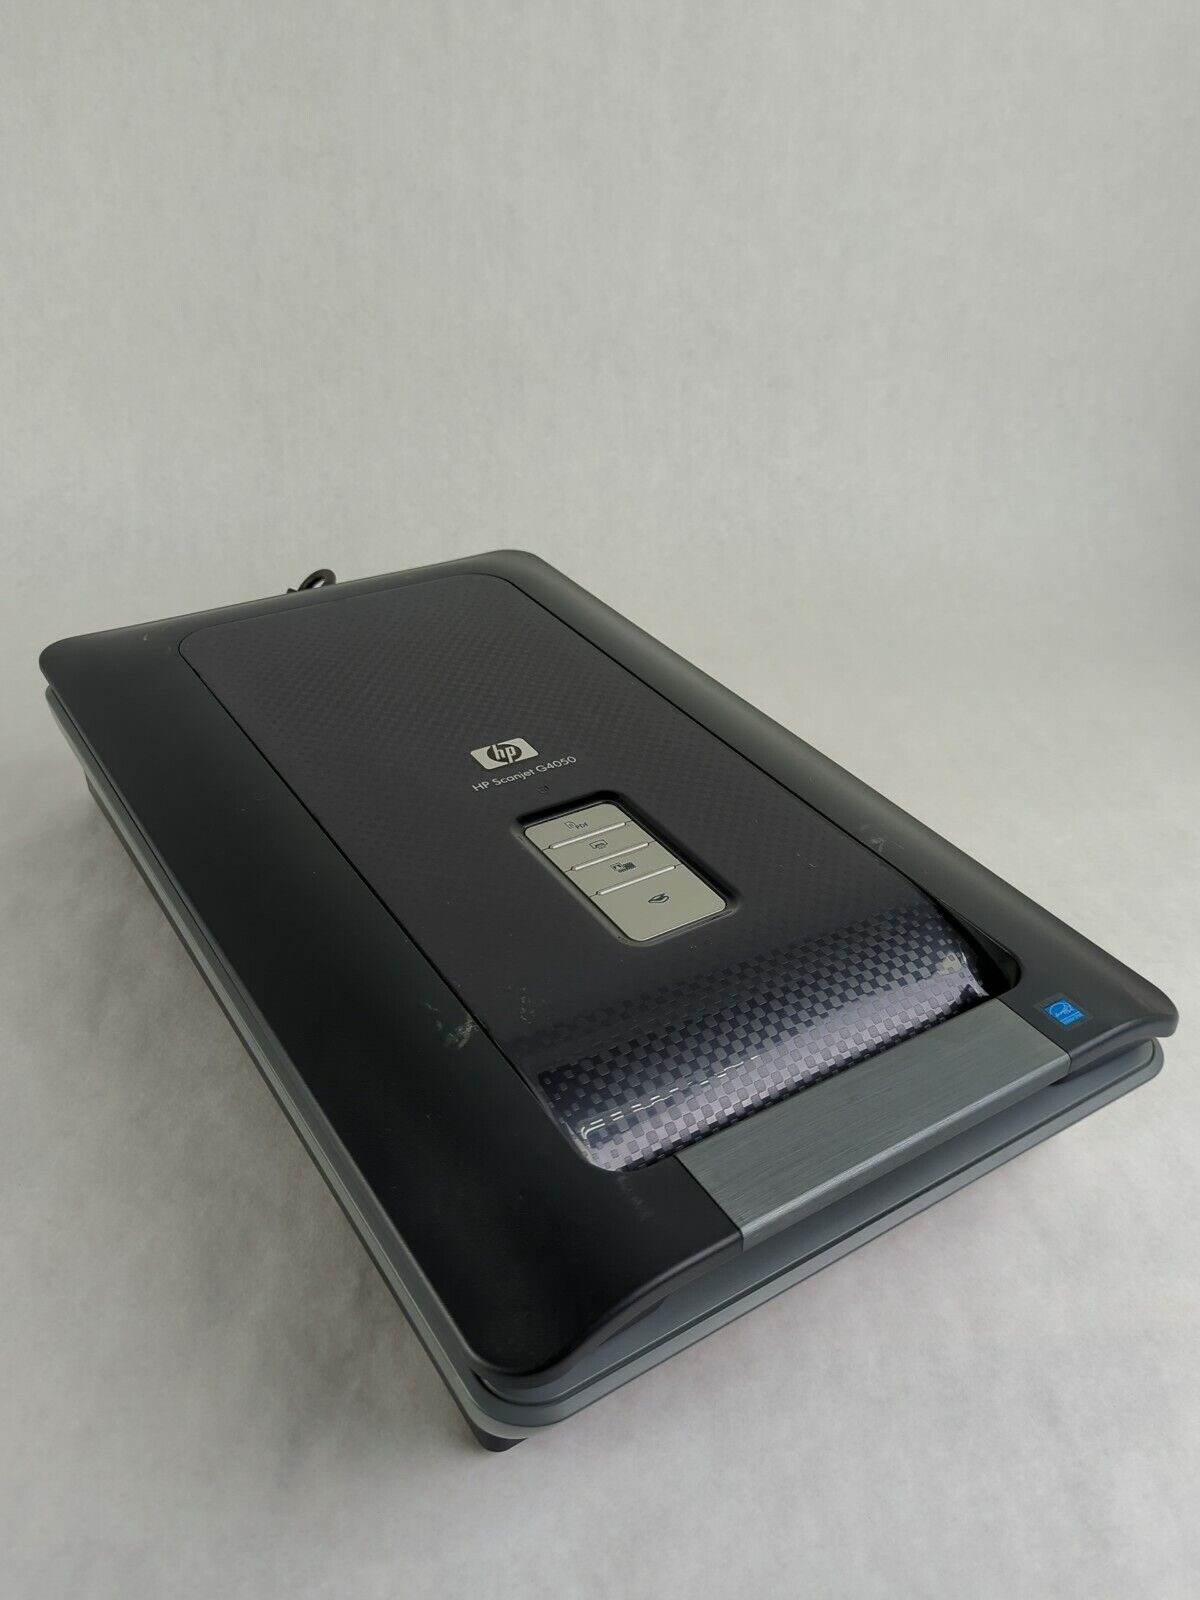 HP ScanJet G4050 Flatbed Photo Document Scanner - No Power Adapter